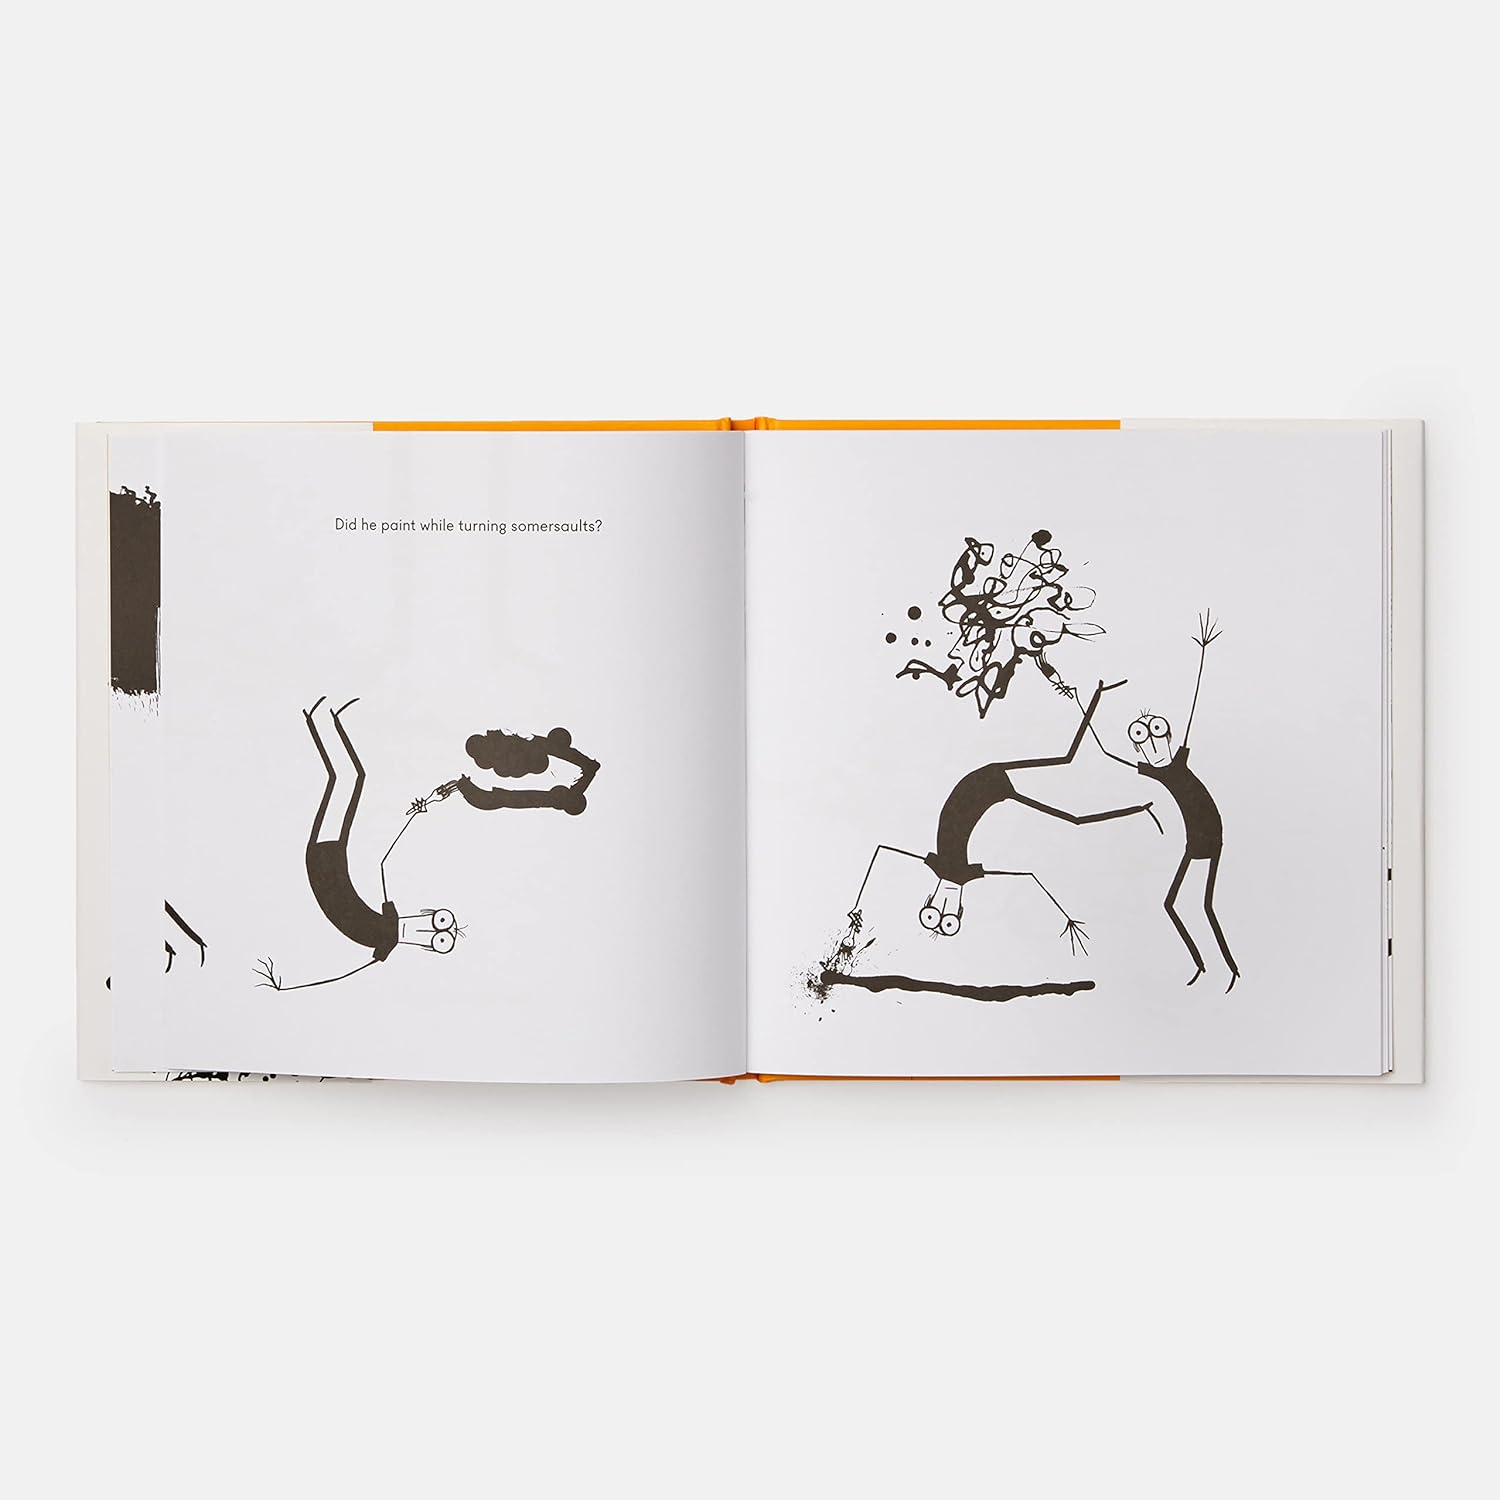 Jackson Pollock Splashed Paint And Wasn't Sorry by Phaidon Press.